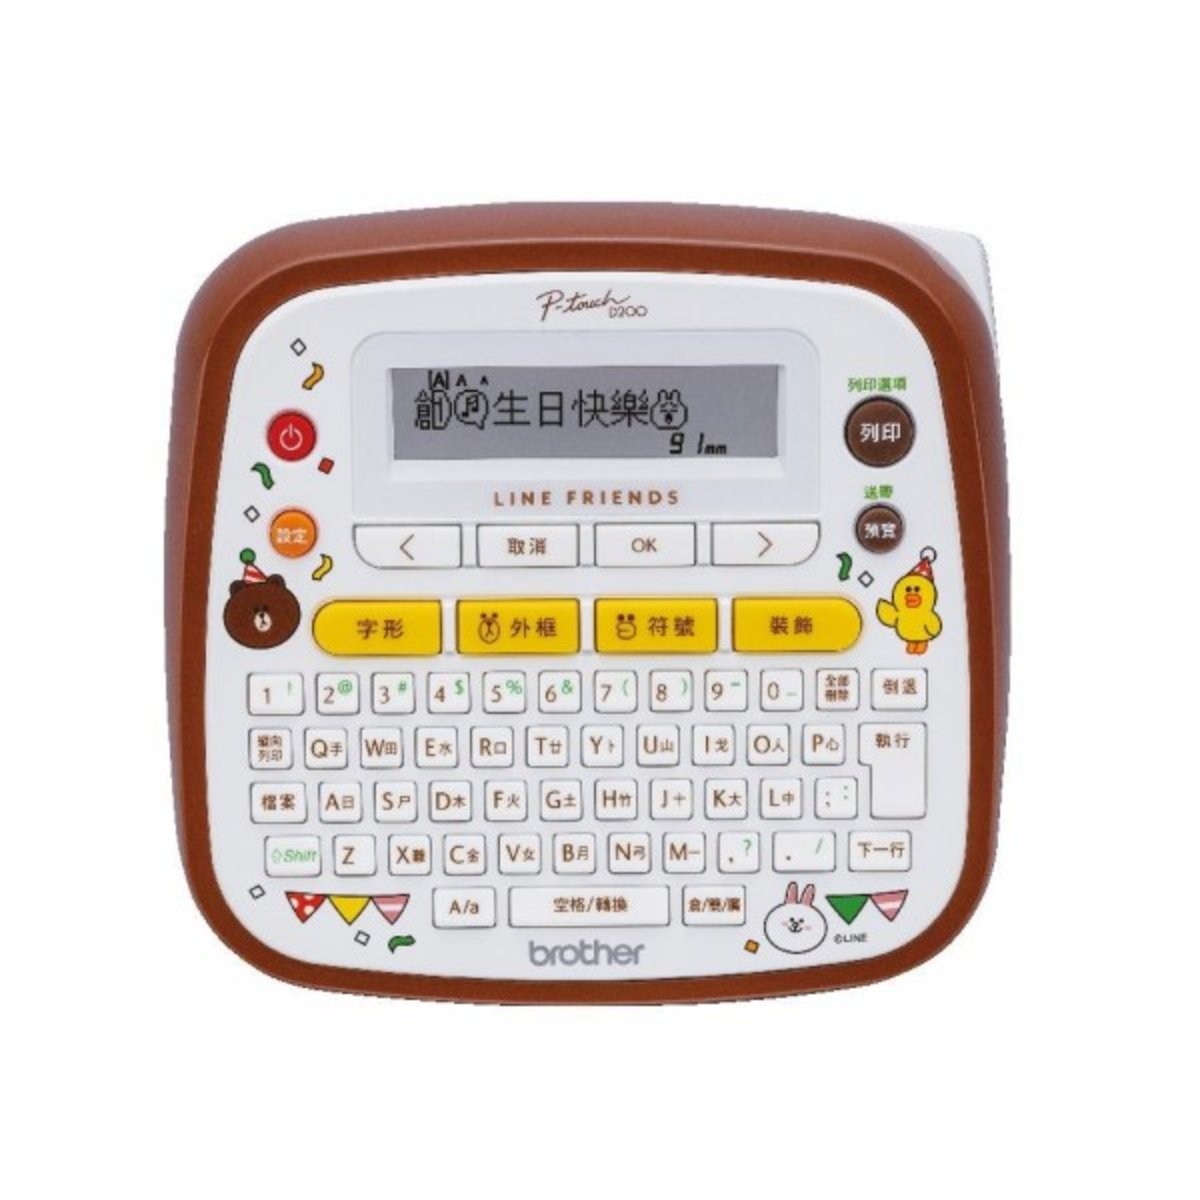 BROTHER - PT-D200LB Line Friends Chinese version portable label machine [Hong Kong licensed product]